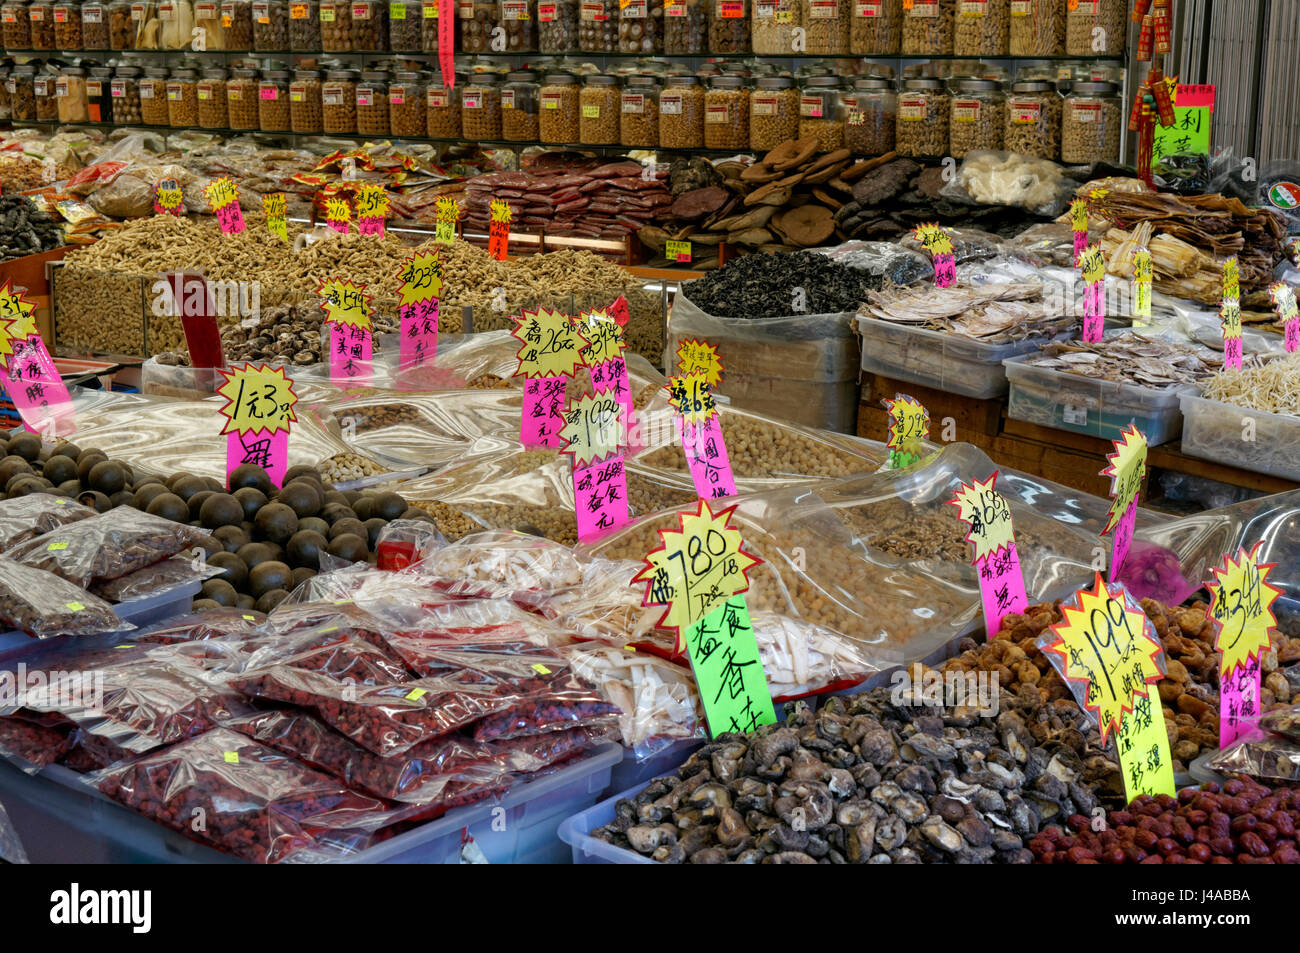 Bins and jars of traditional Chinese dried food and herbs in a shop in Chinatown, Vancouver, British Columbia, Canada Stock Photo